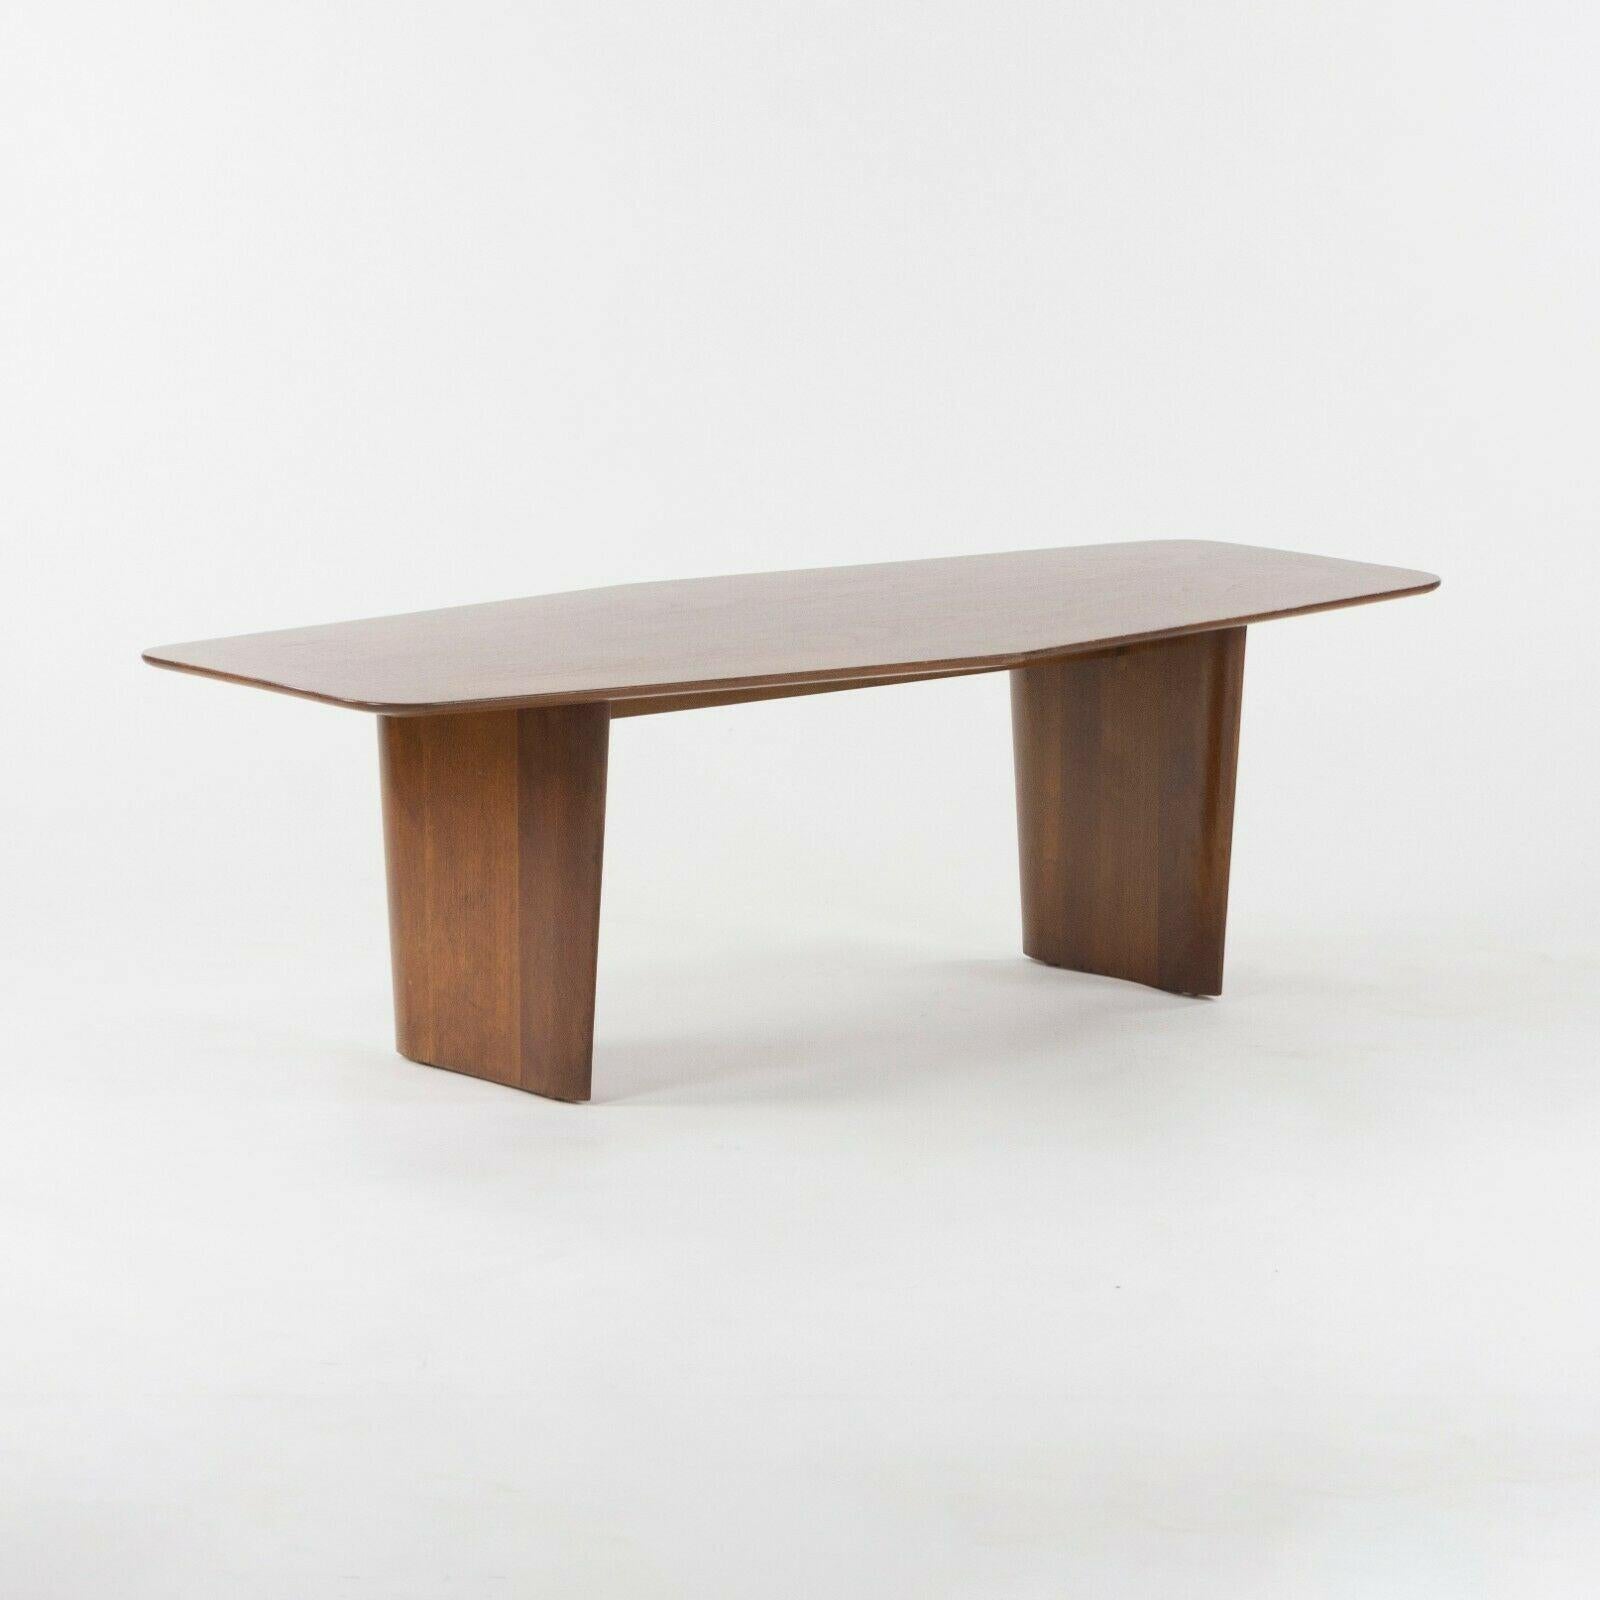 Mid-20th Century 1955 T.H. Robsjohn Gibbings for Widdicomb 3307 Coffee Table in Sherry Walnut For Sale